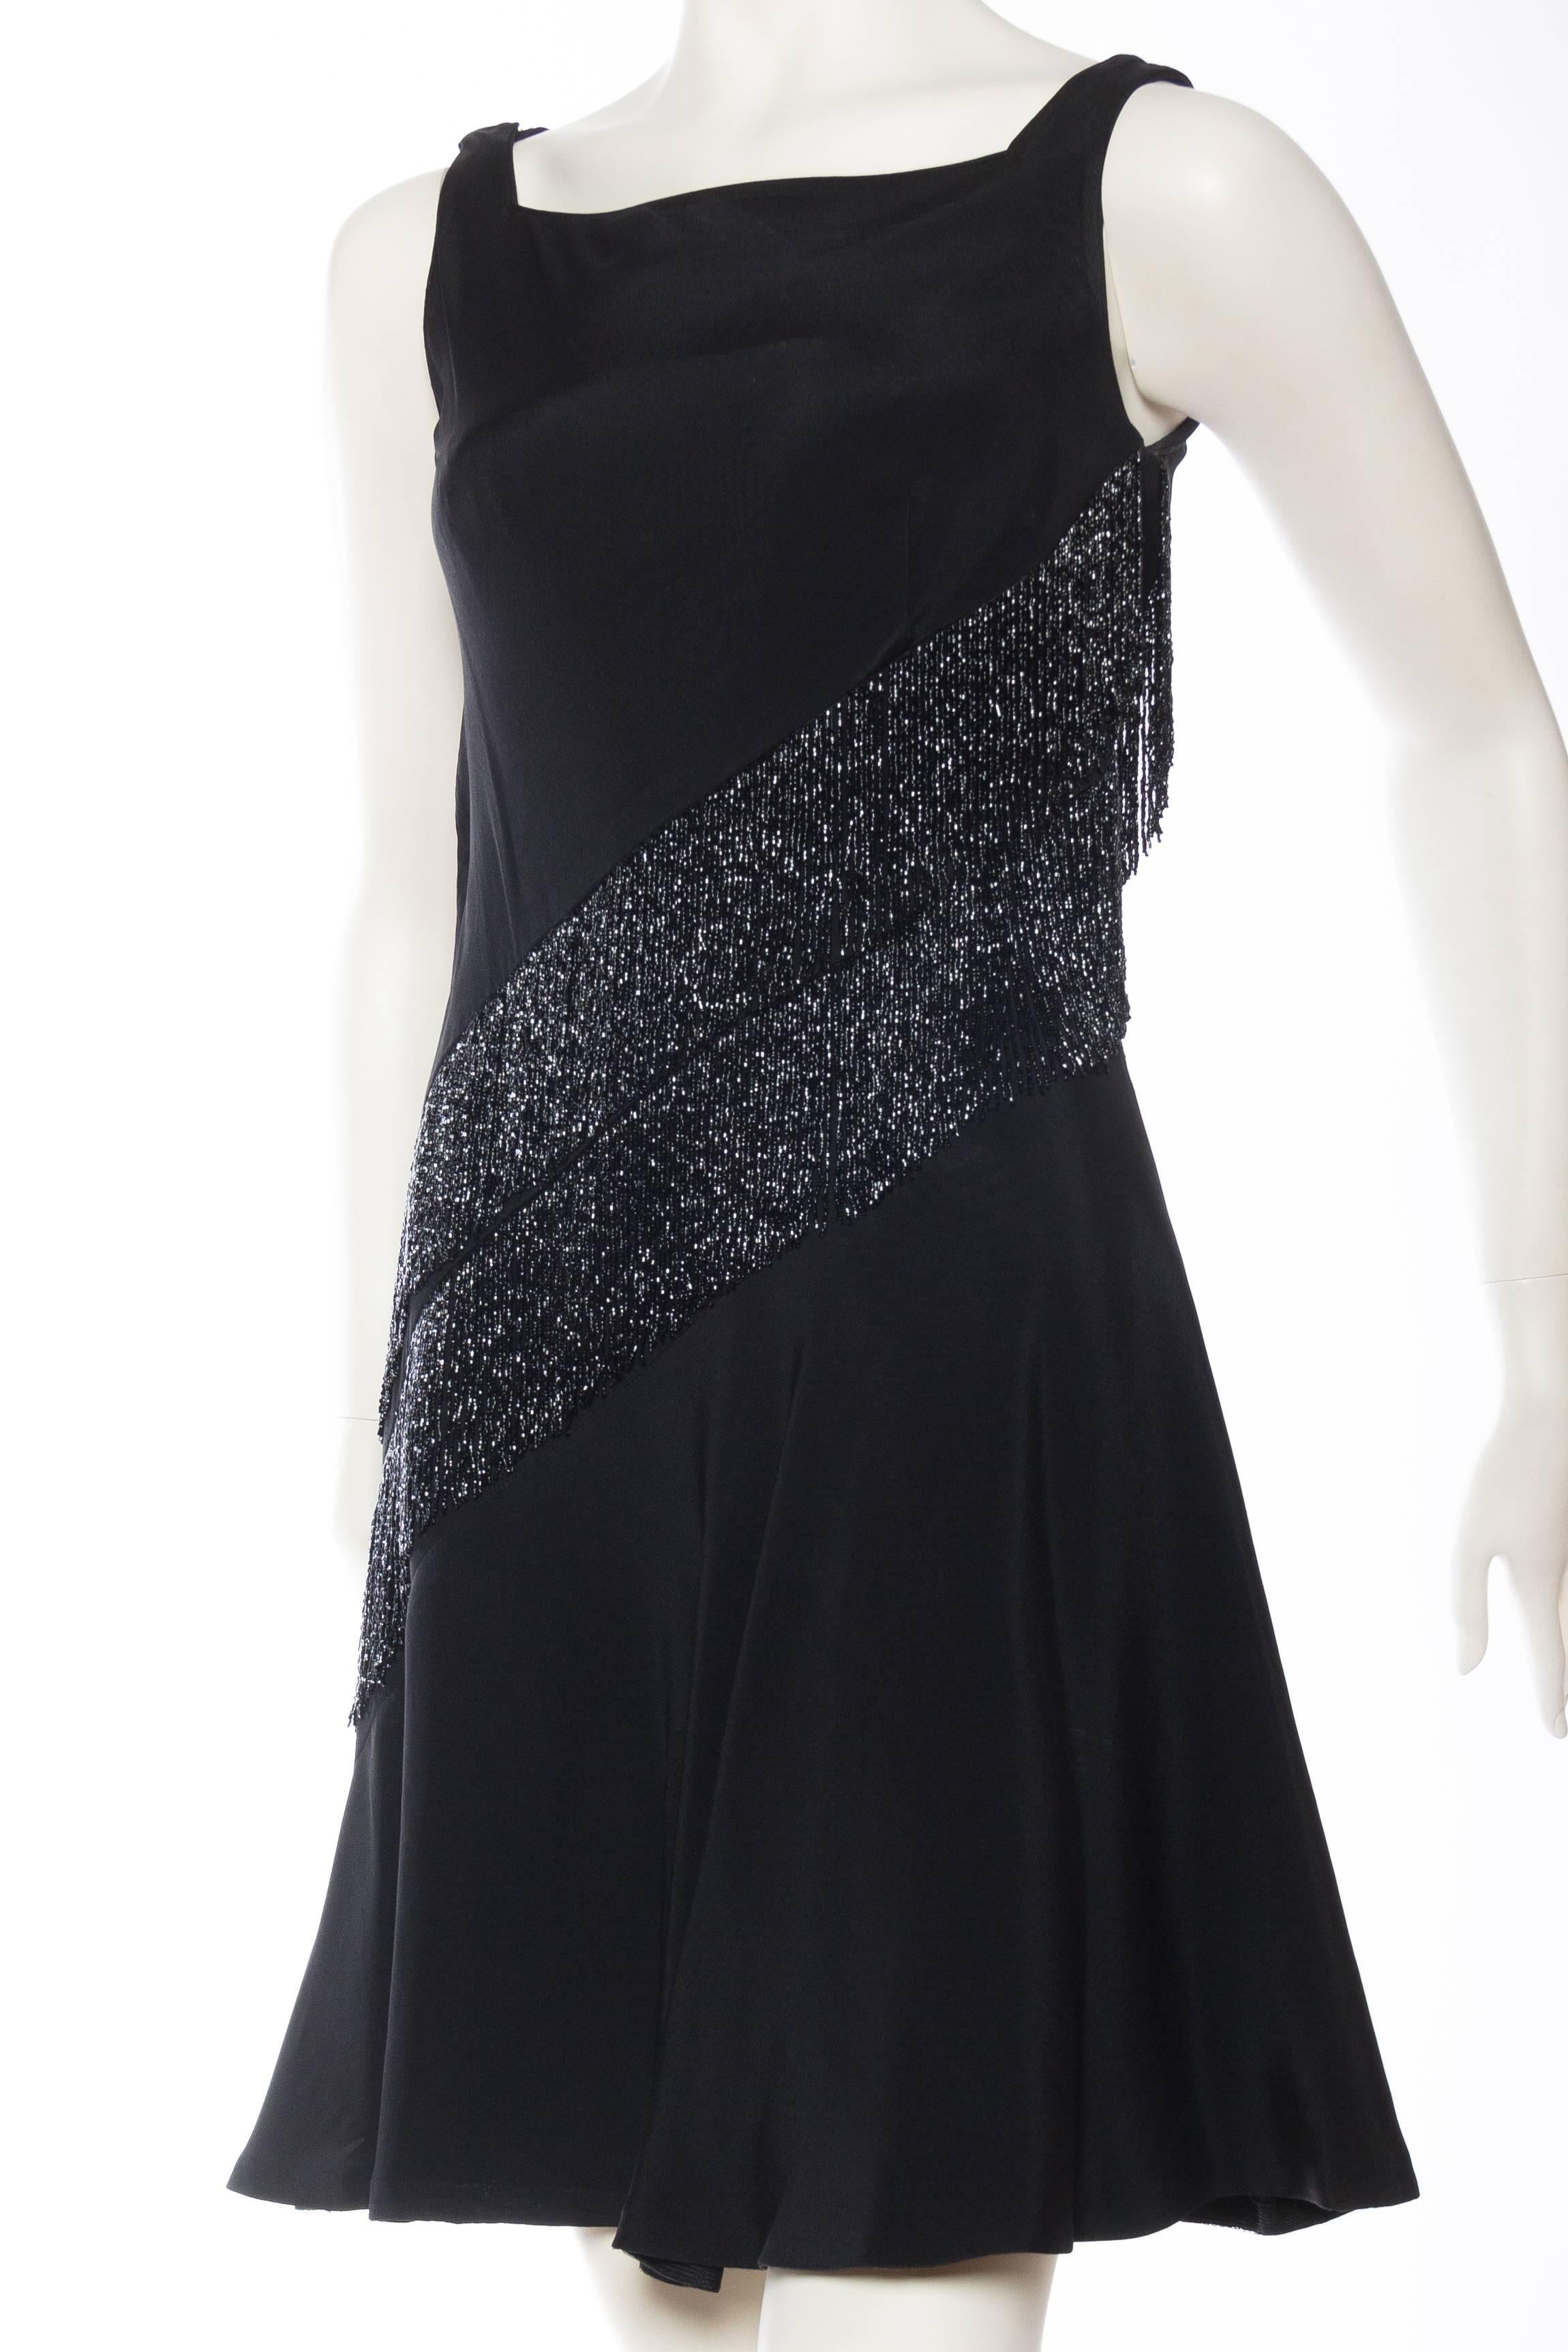 1960S MR BLACKWELL Black Silk Faille Bias Beaded Fringe Mod Cocktail Dress In Excellent Condition For Sale In New York, NY